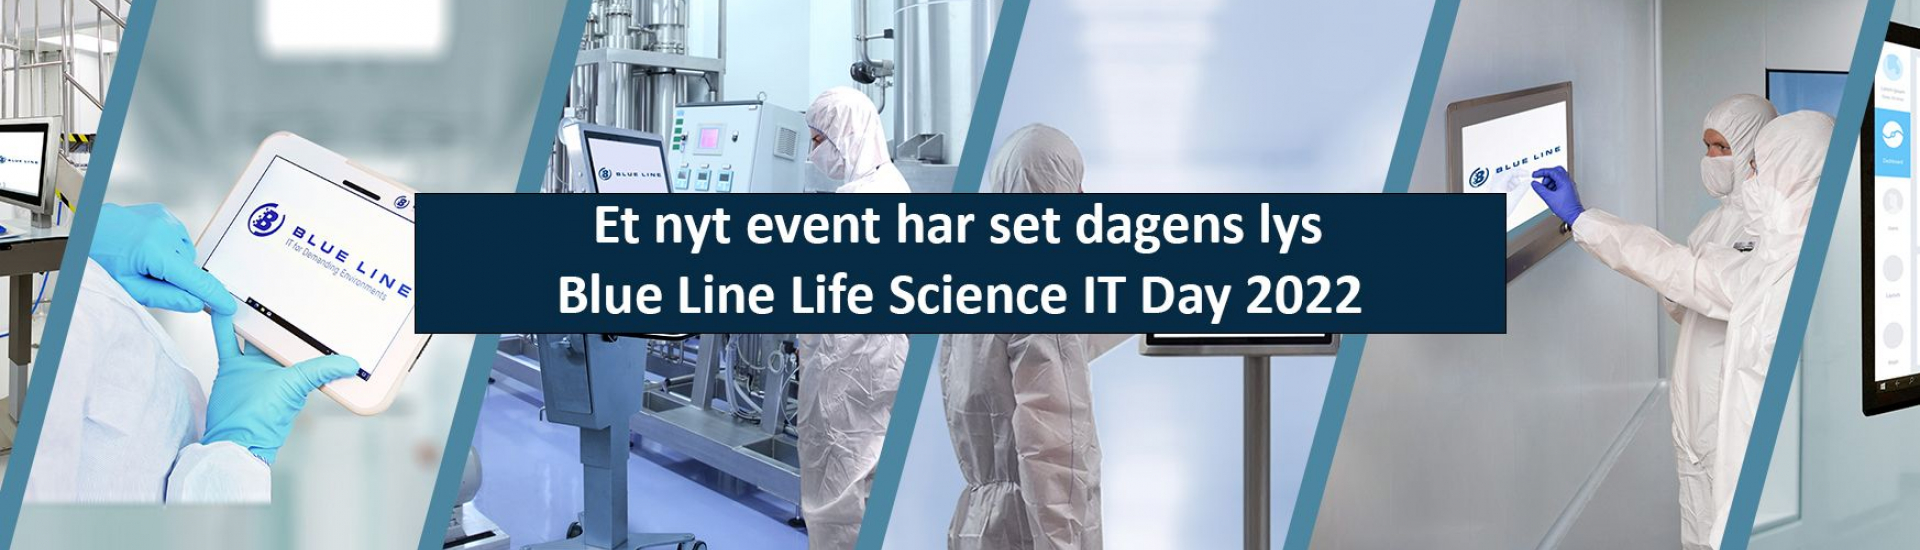 Blue Line Life Science IT Day 2022 